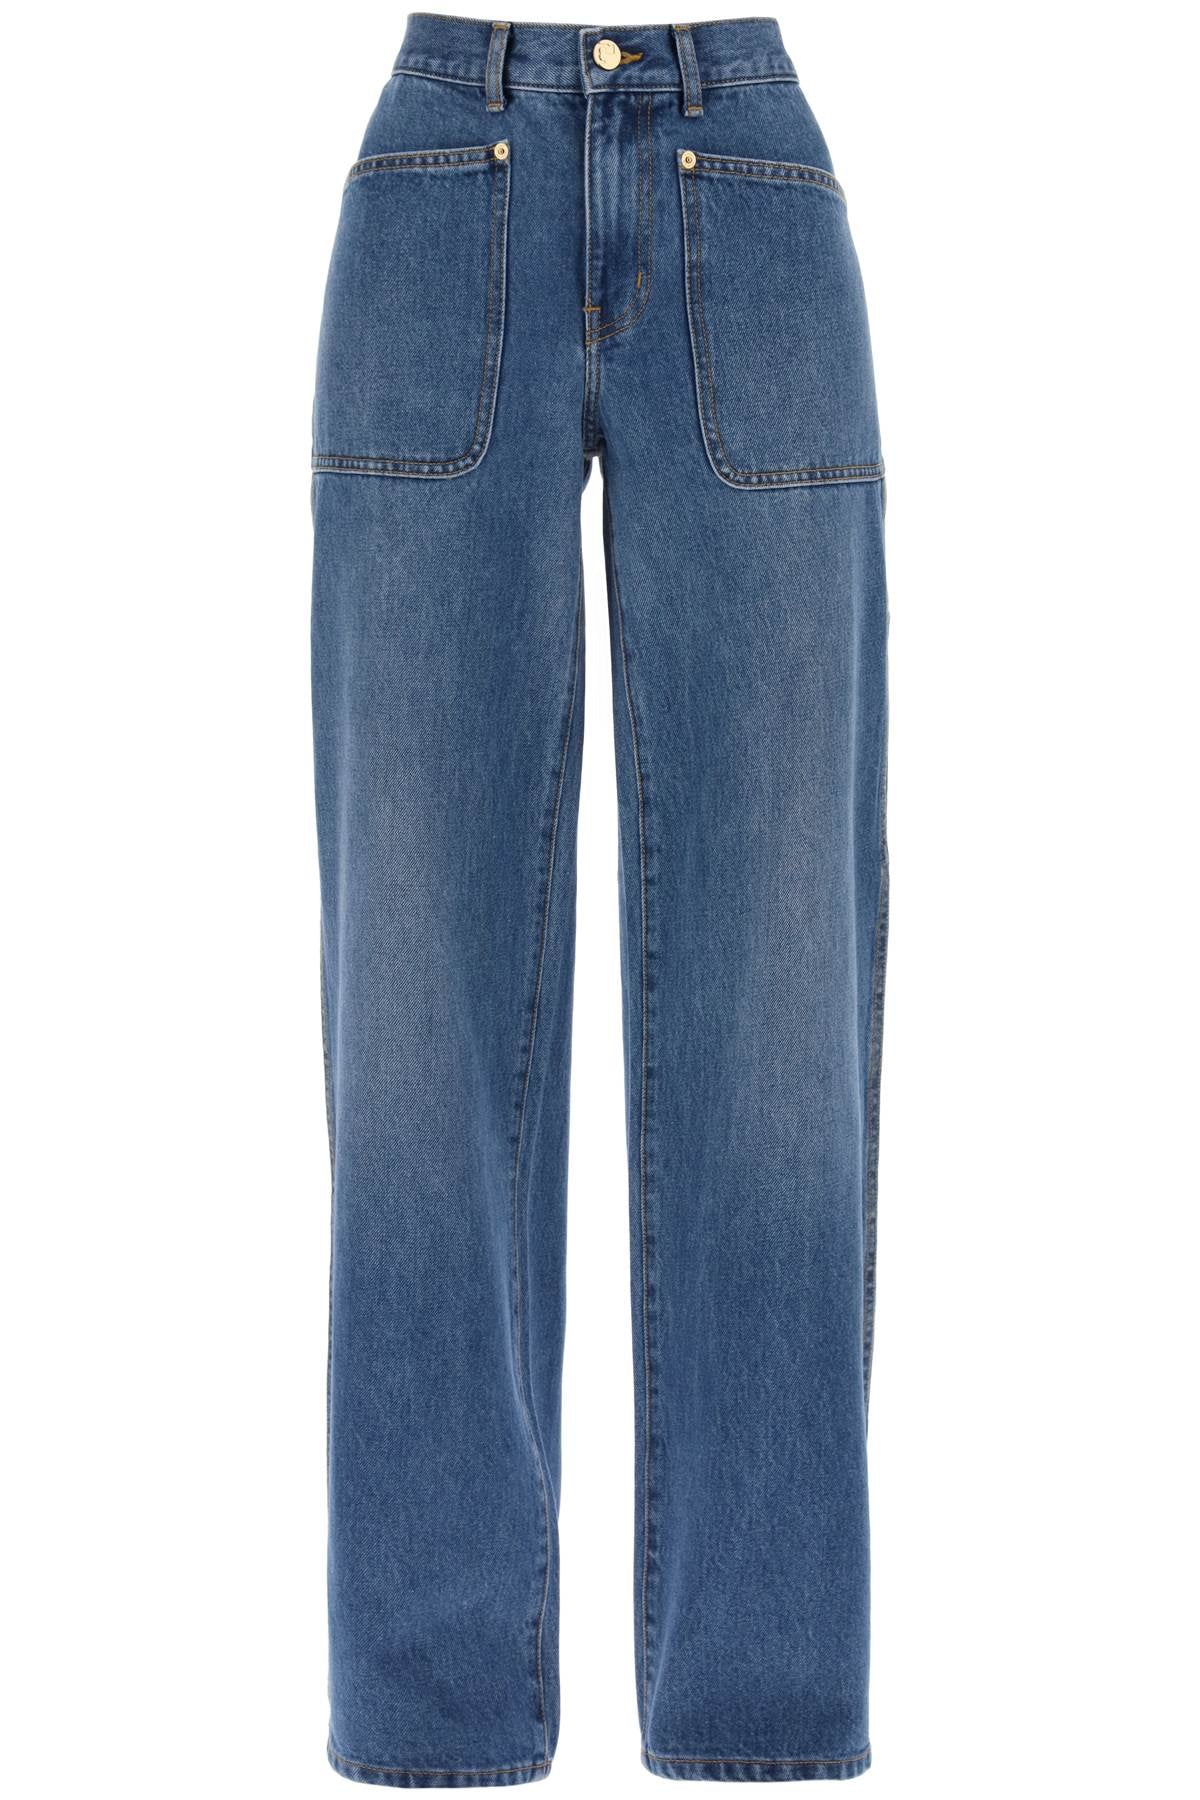 Tory burch high-waisted cargo style jeans in-0